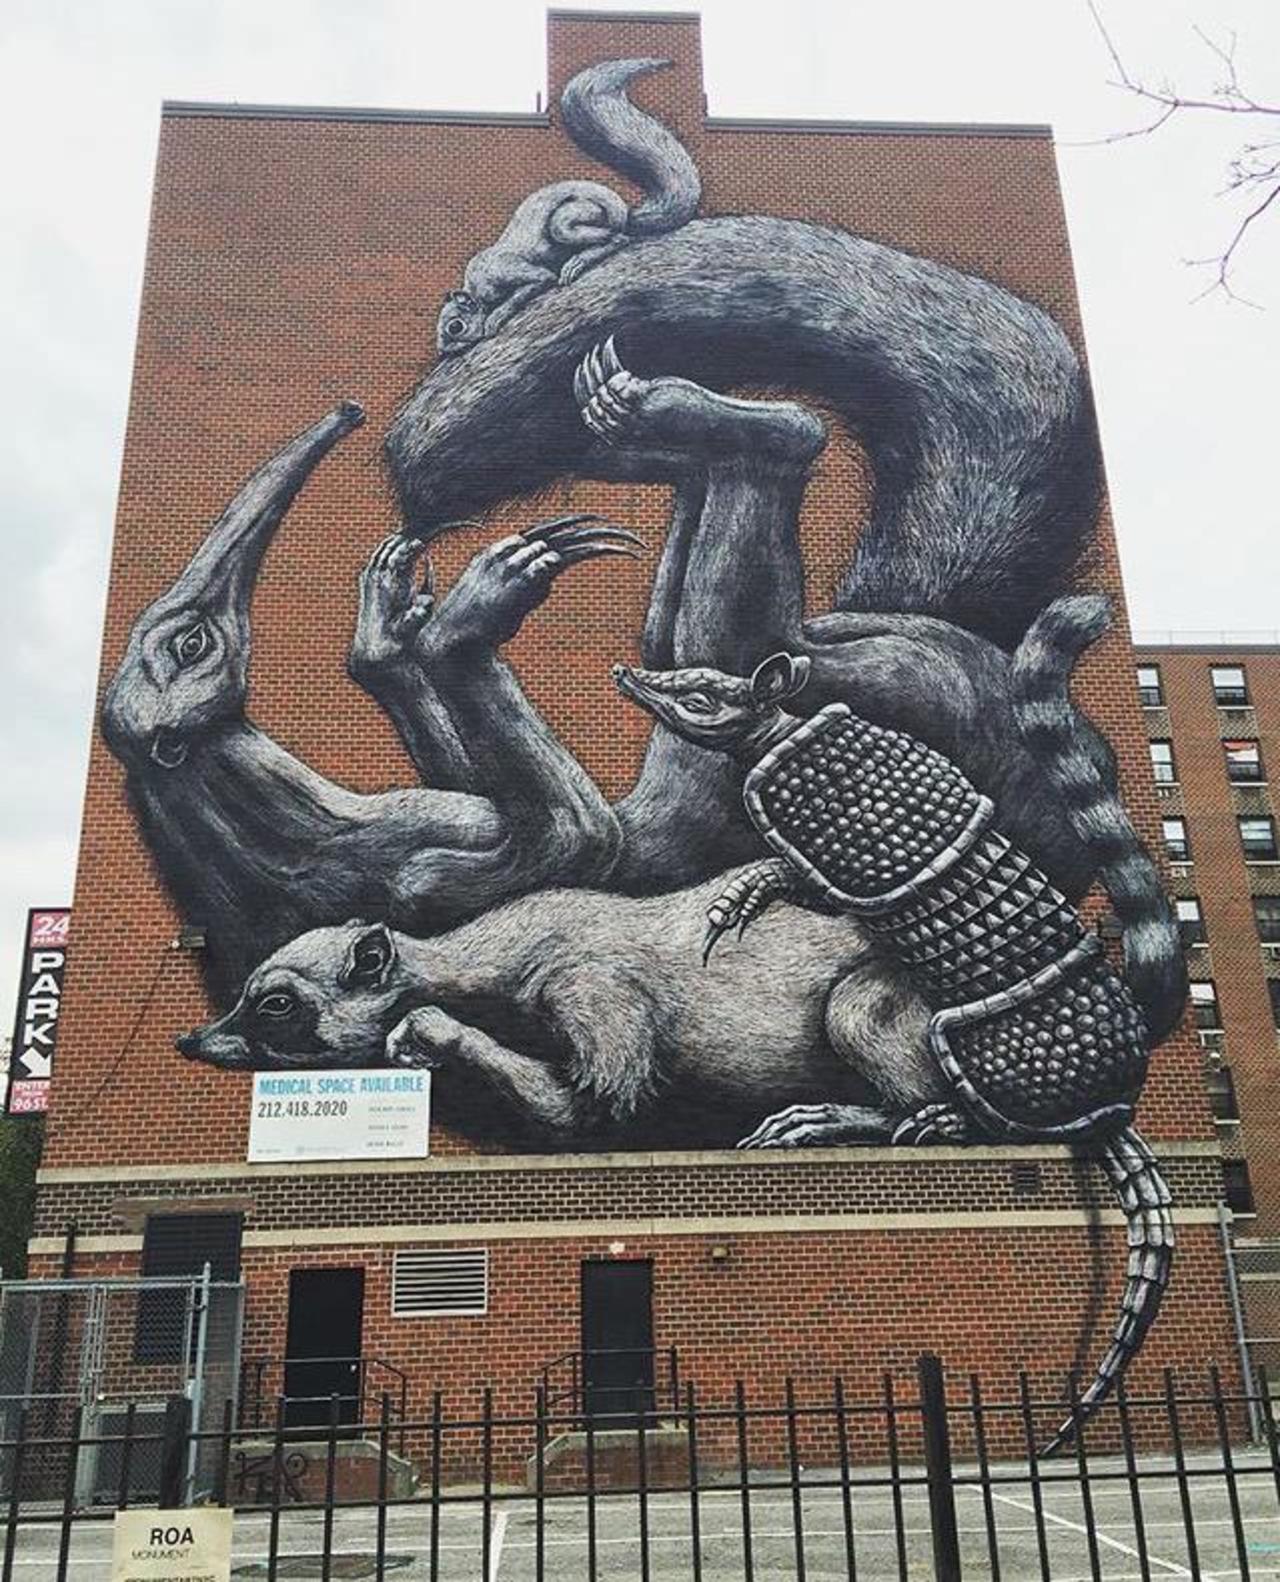 New tumblr post: "The completed new large scale Street Art wall by ROA in NYC

#art #graffiti #mural #streetart http://t.co/wgIU07PaYz" …